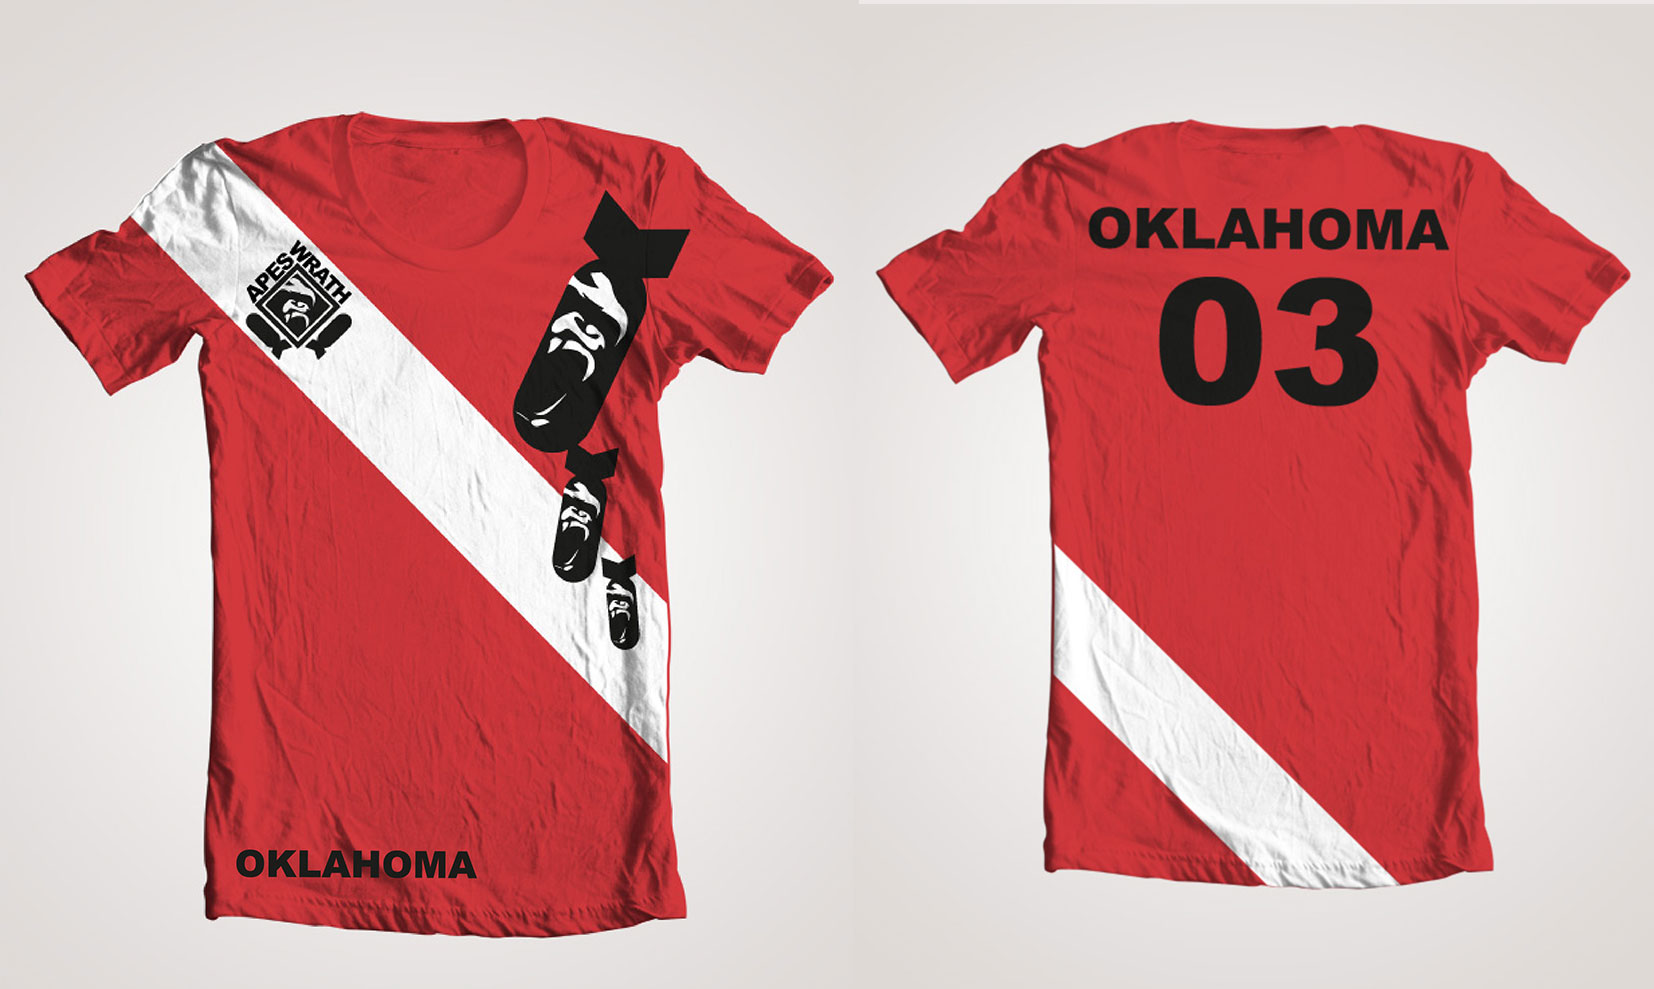 University of oklahoma ultimate frisbee team apes of wrath jersey design red